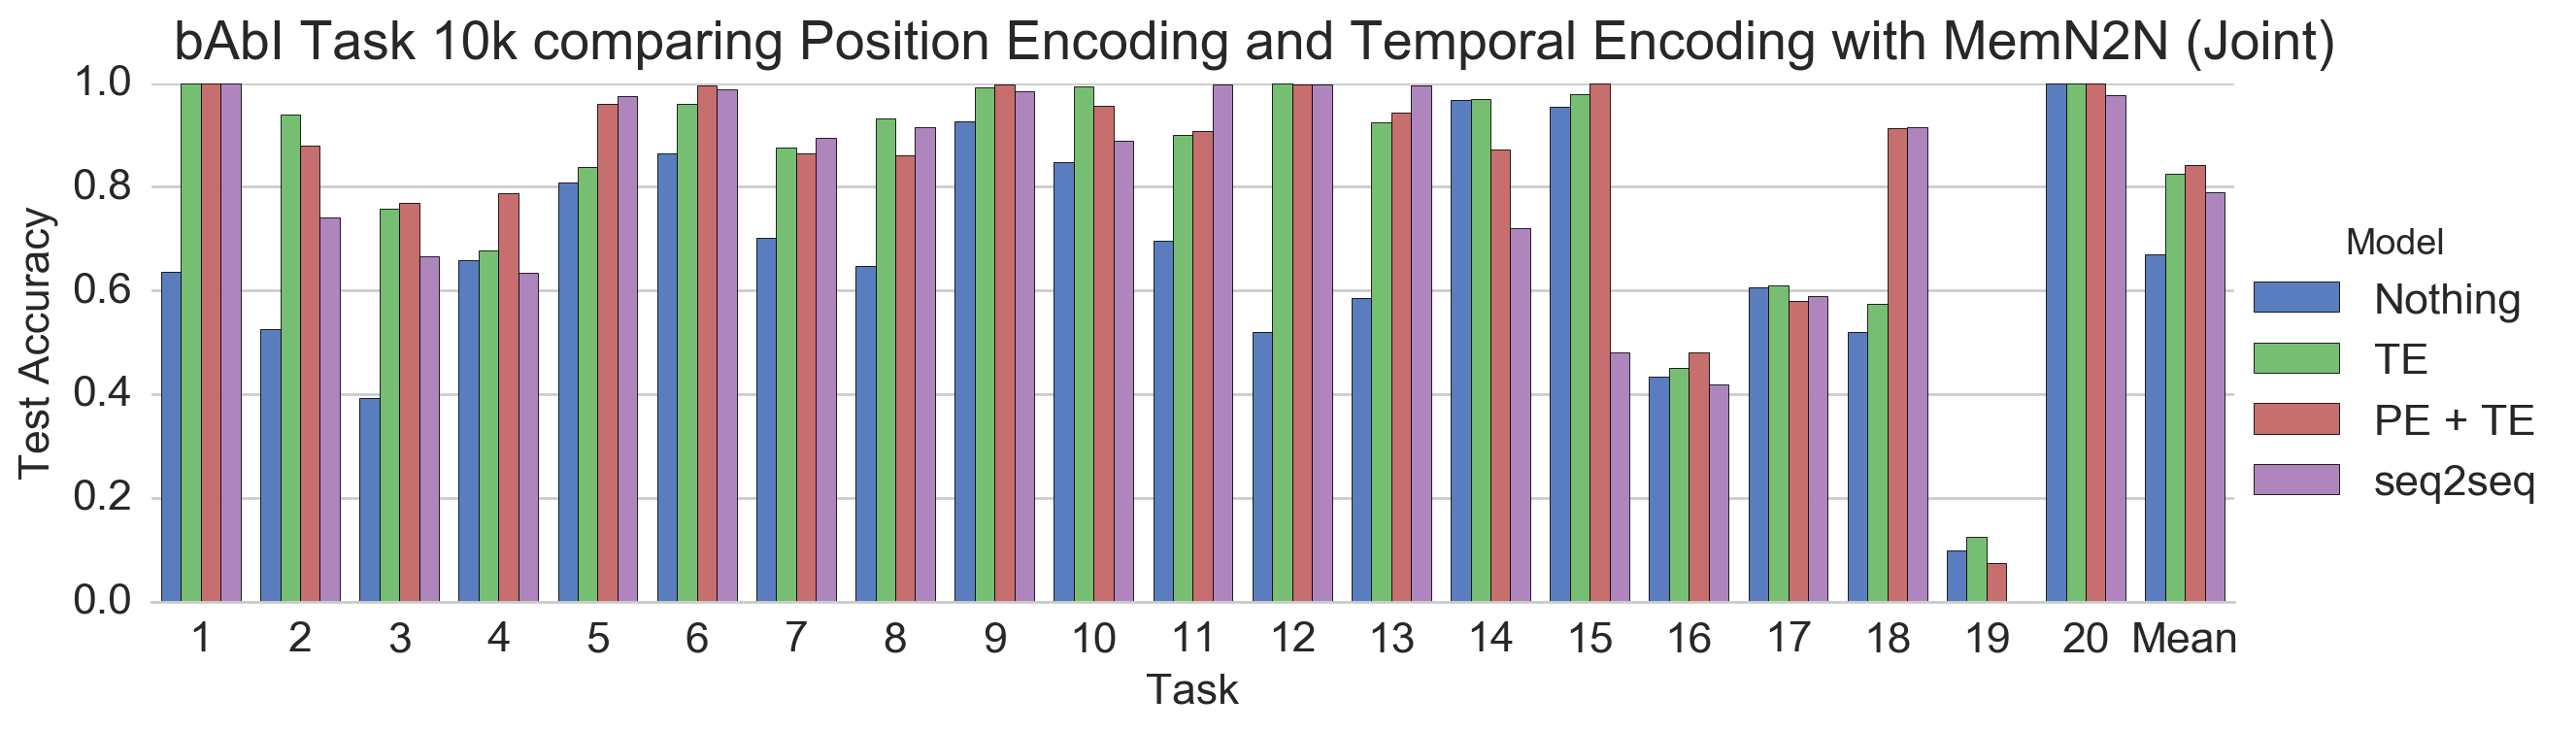 bAbI Task 10k comparing Position Encoding and Temporal Encoding with MemN2N (Joint)